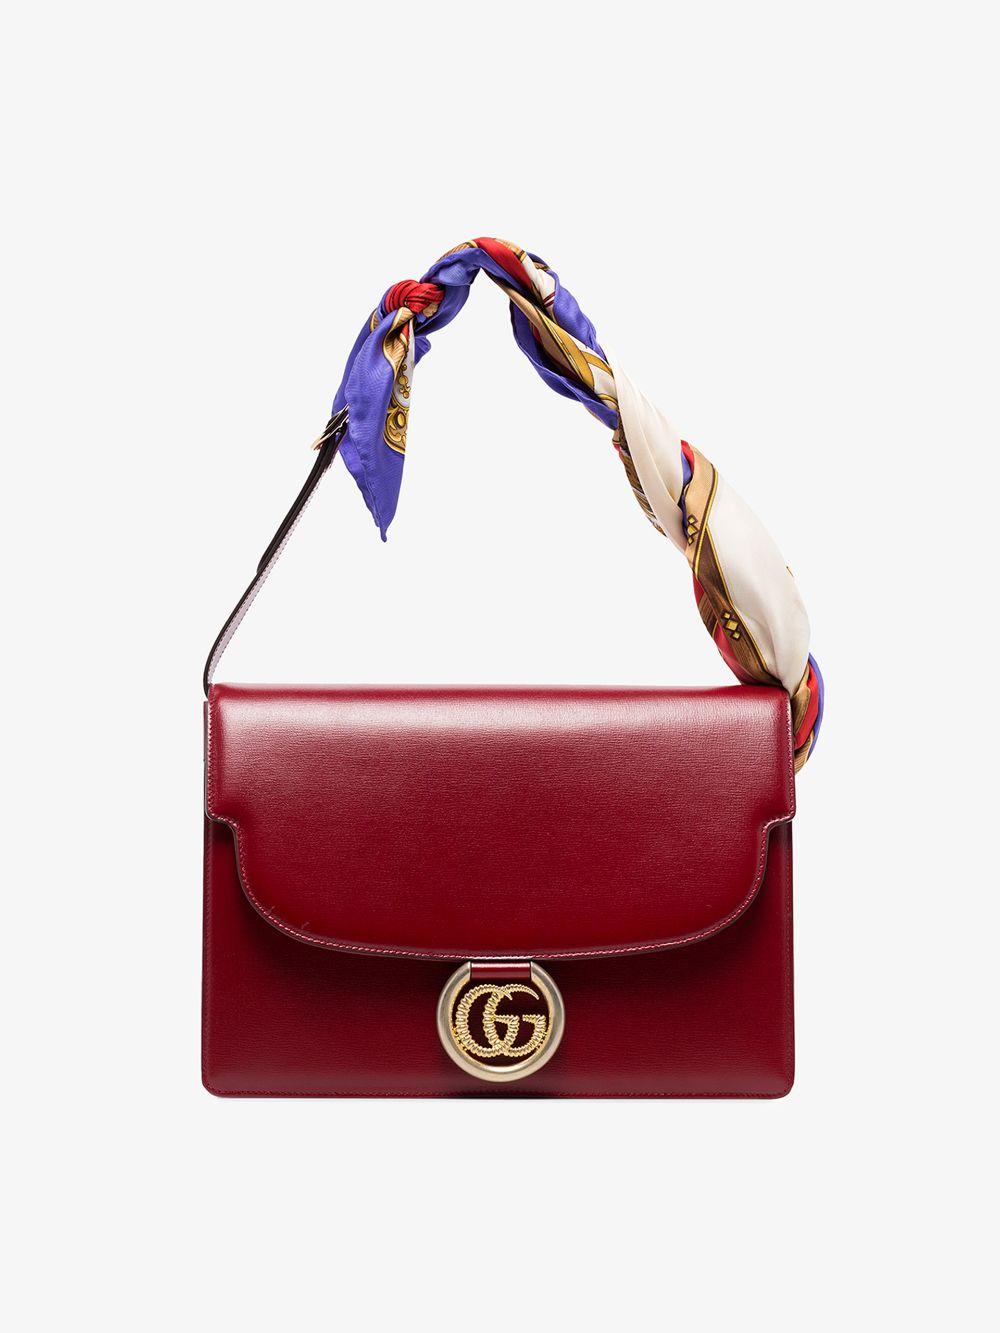 gucci bag with scarf